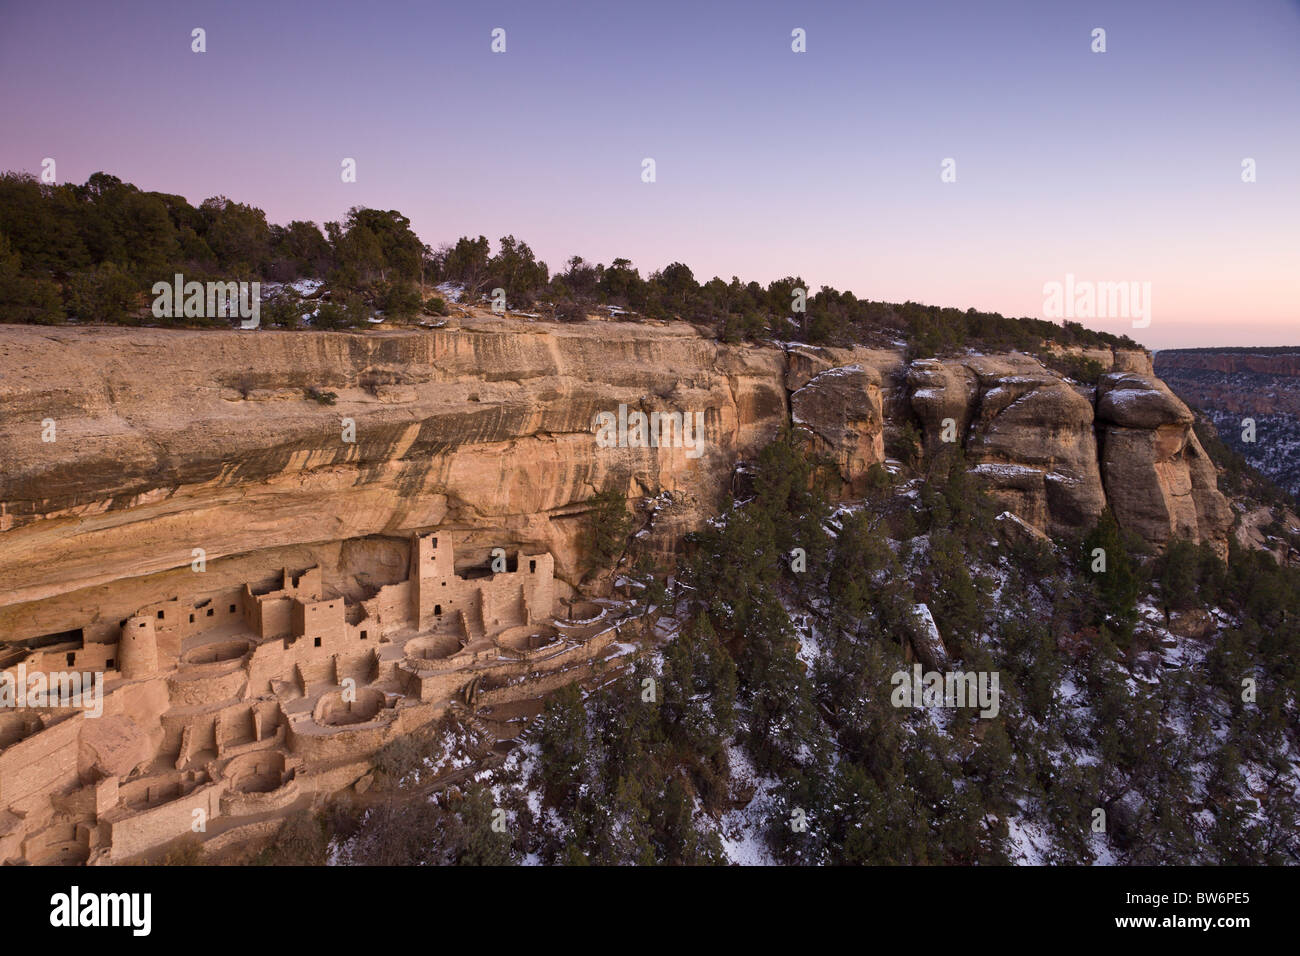 Dusk at the Cliff Palace cave dwelling during winter in Mesa Verde National Park, Colorado, USA. Stock Photo